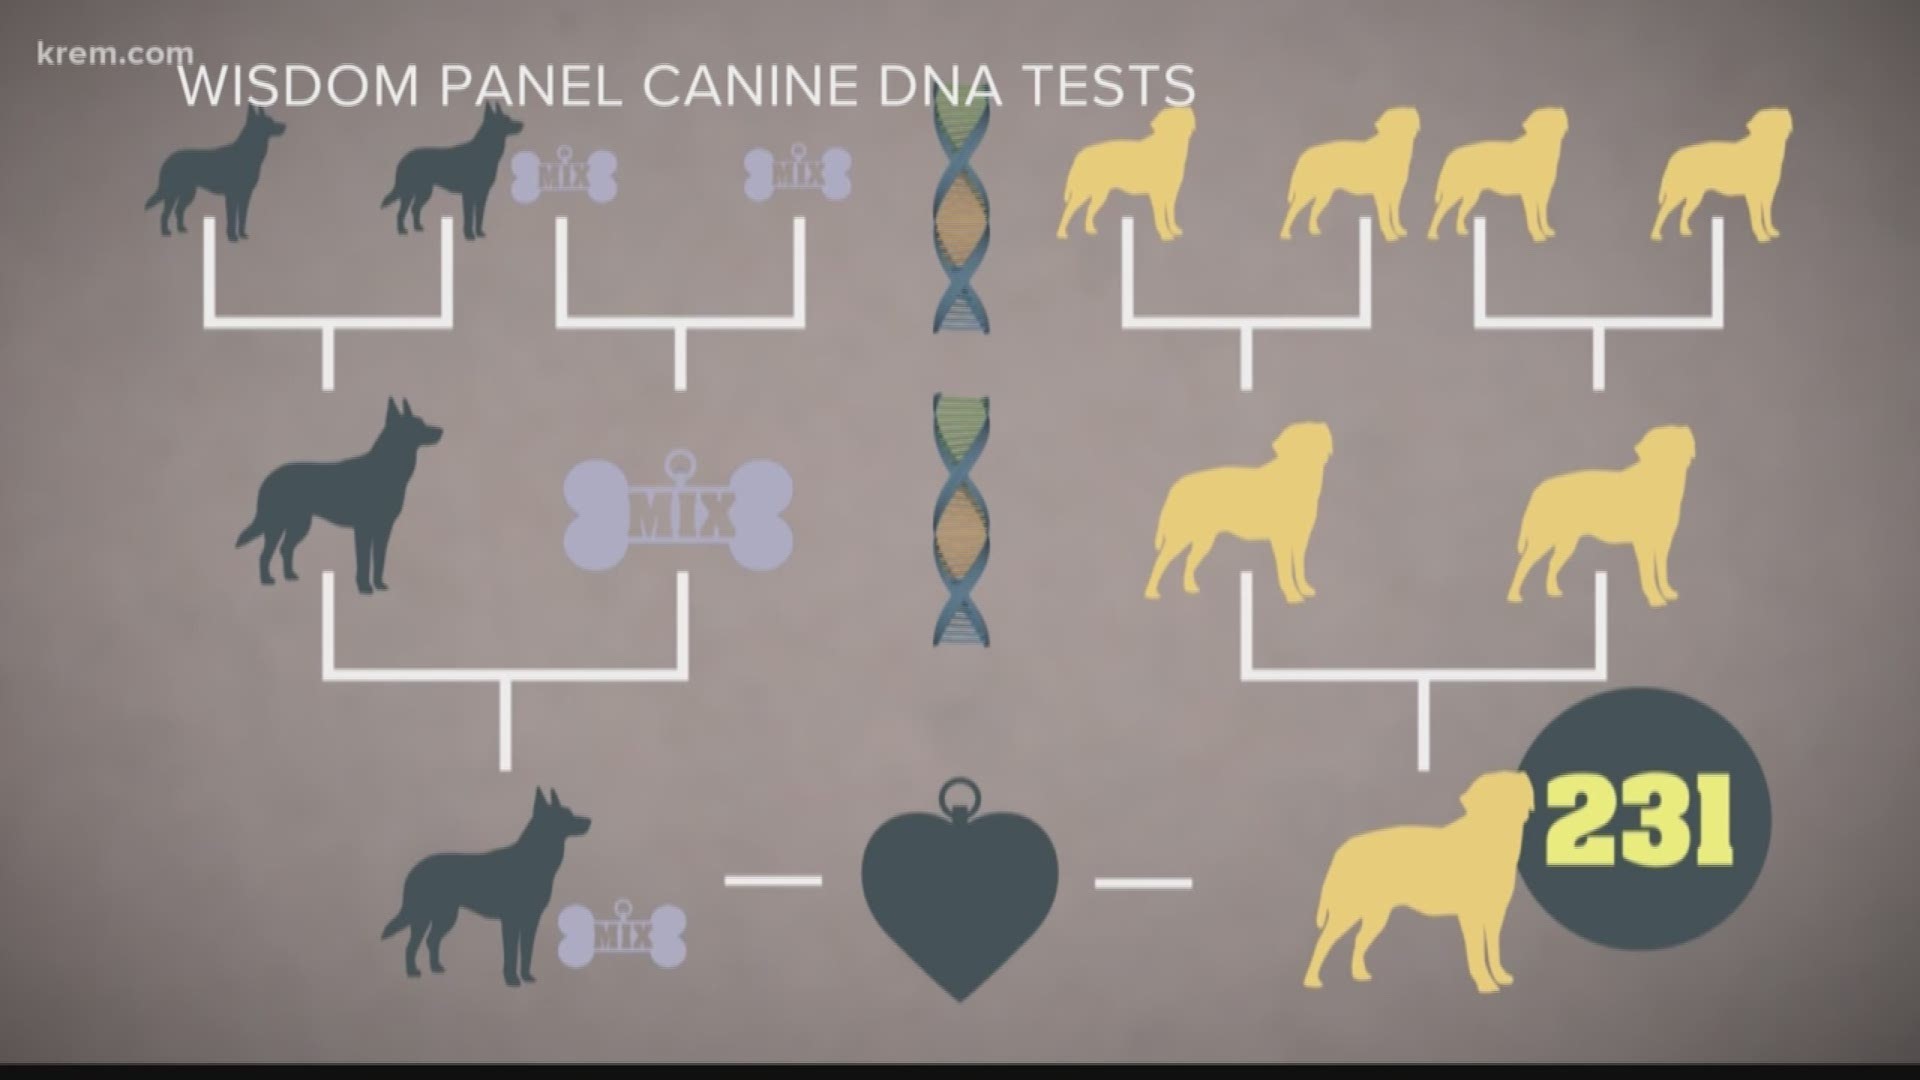 Doggy DNA tests can pinpoint the breed of your dog (5-23-18)